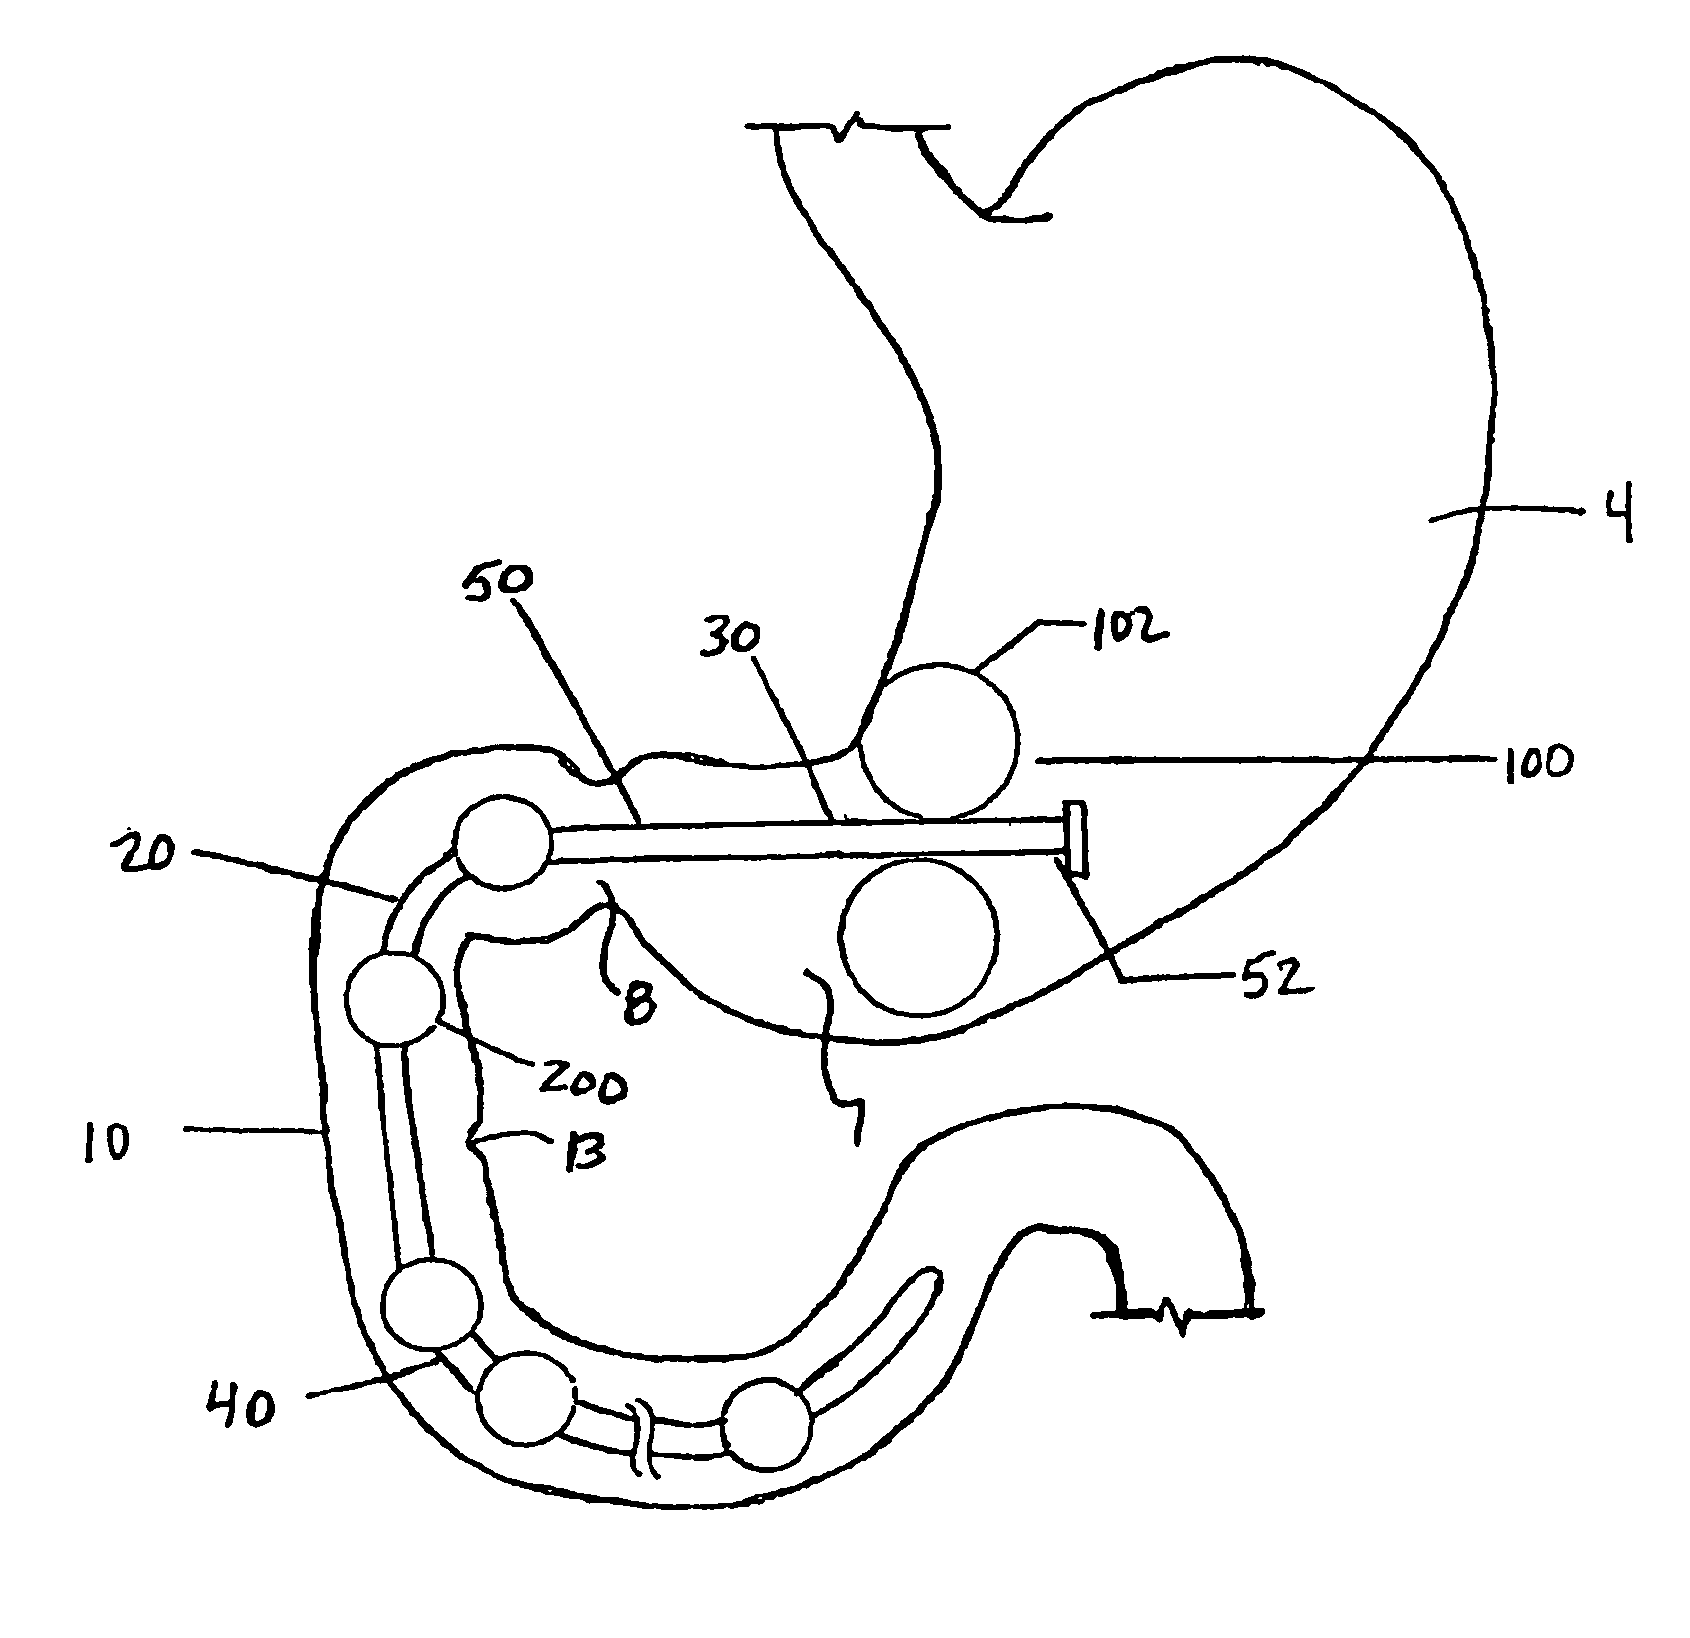 Methods and devices to curb appetite and/or reduce food intake